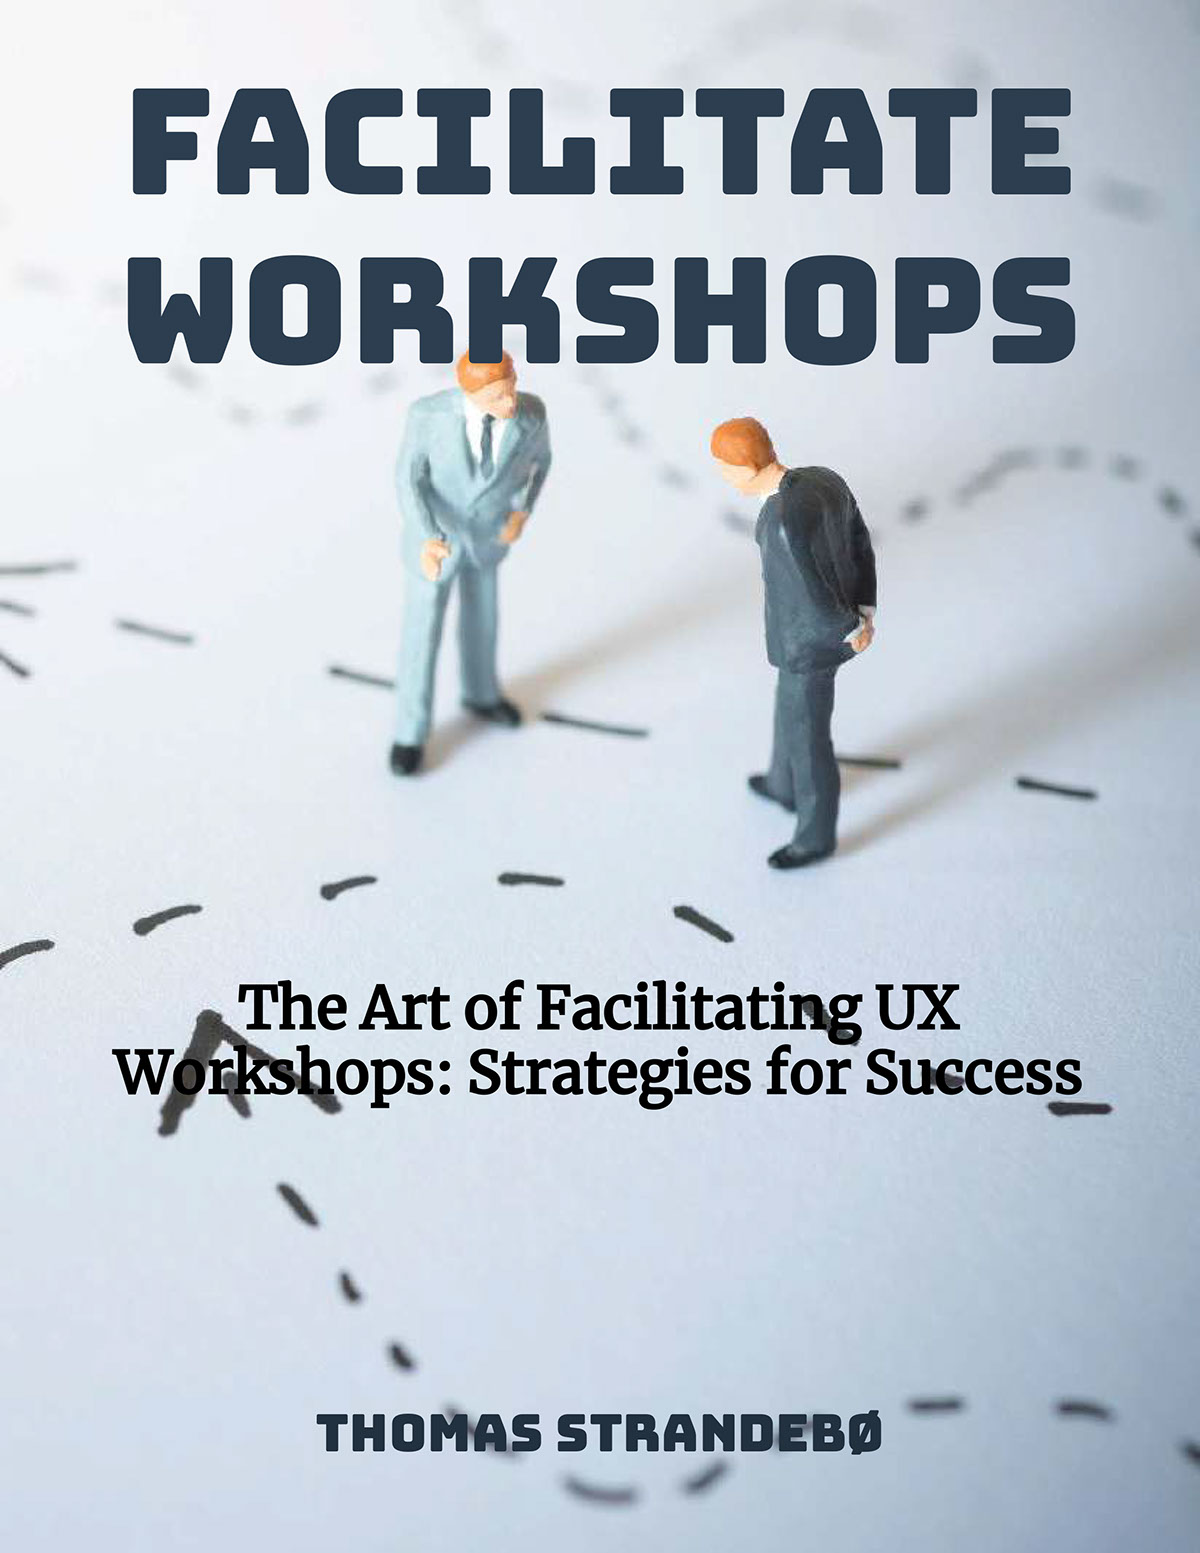 The Art of Facilitating UX Workshops Strategies for Success rendition image